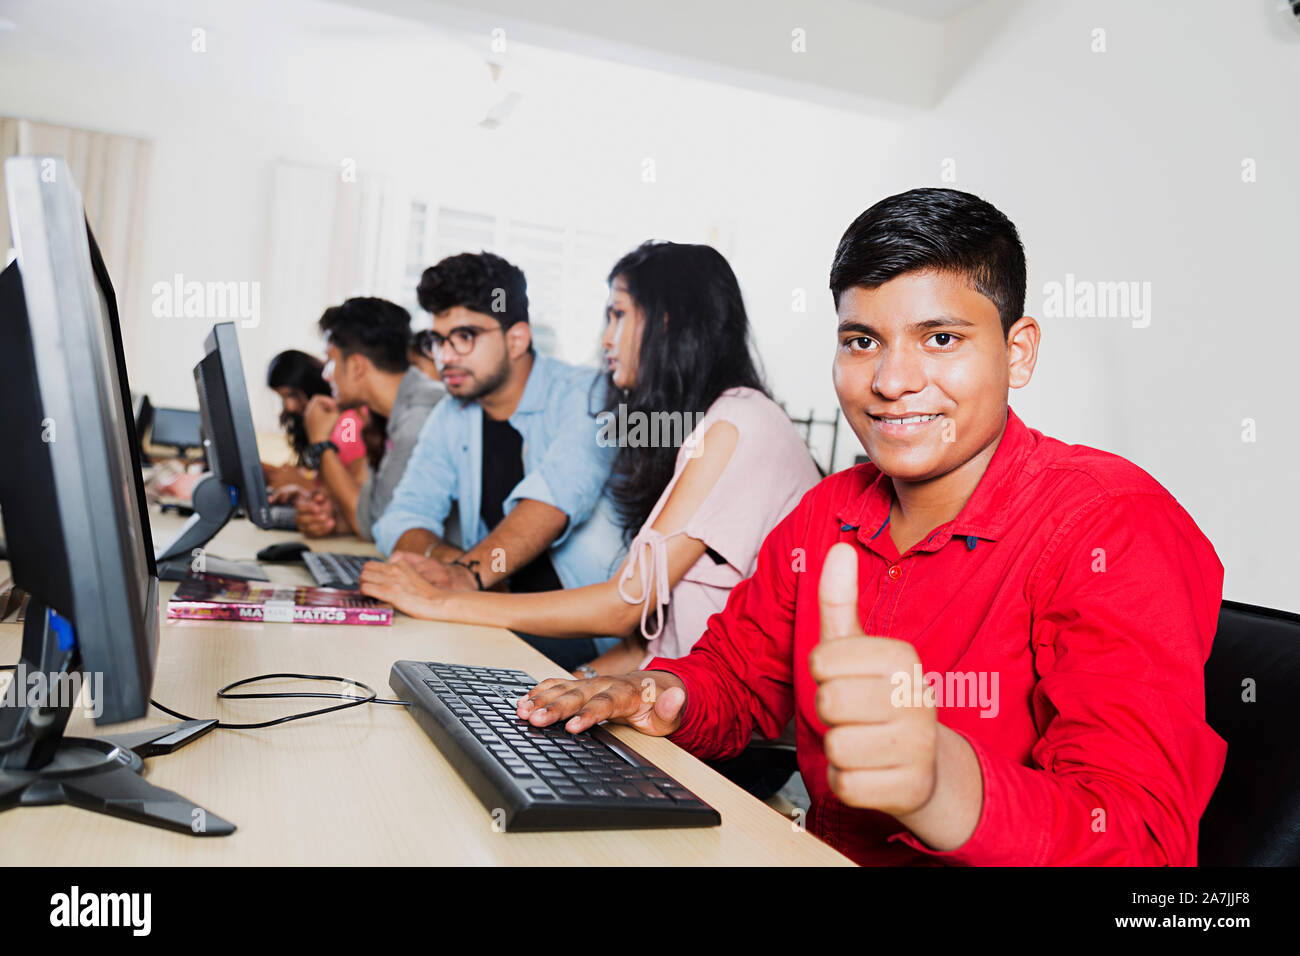 Indian College Boy-Student Using Computer Showing Thumb-up Studying E-Learning With Classmates At Computer Class Stock Photo